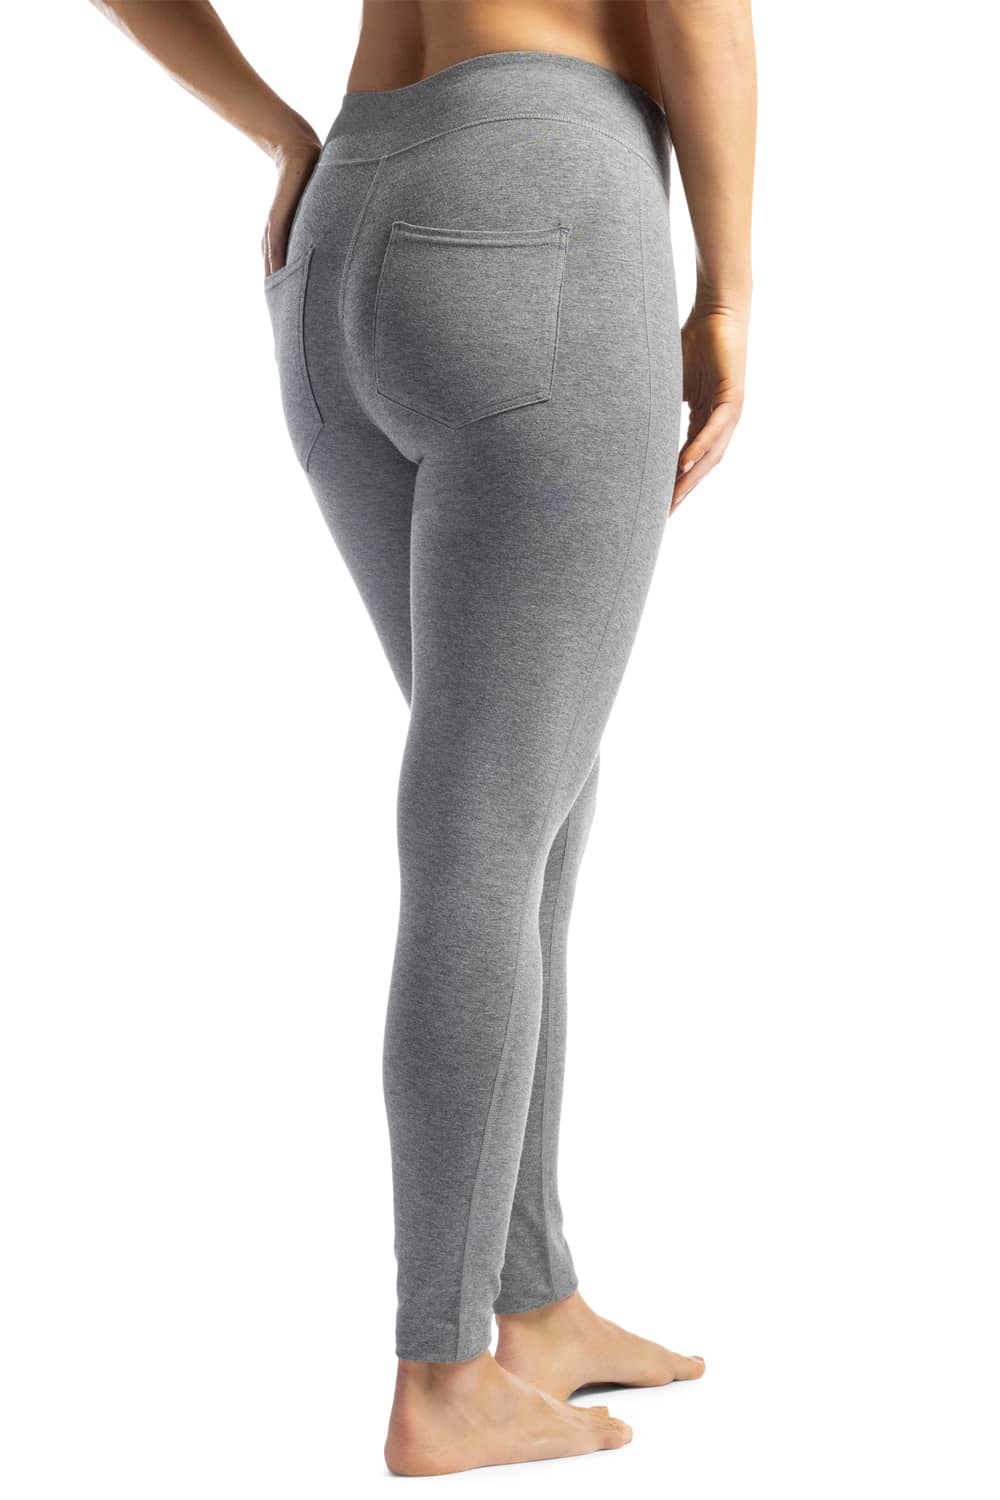 Women's Athleisure, Yoga Leggings with Back Pockets